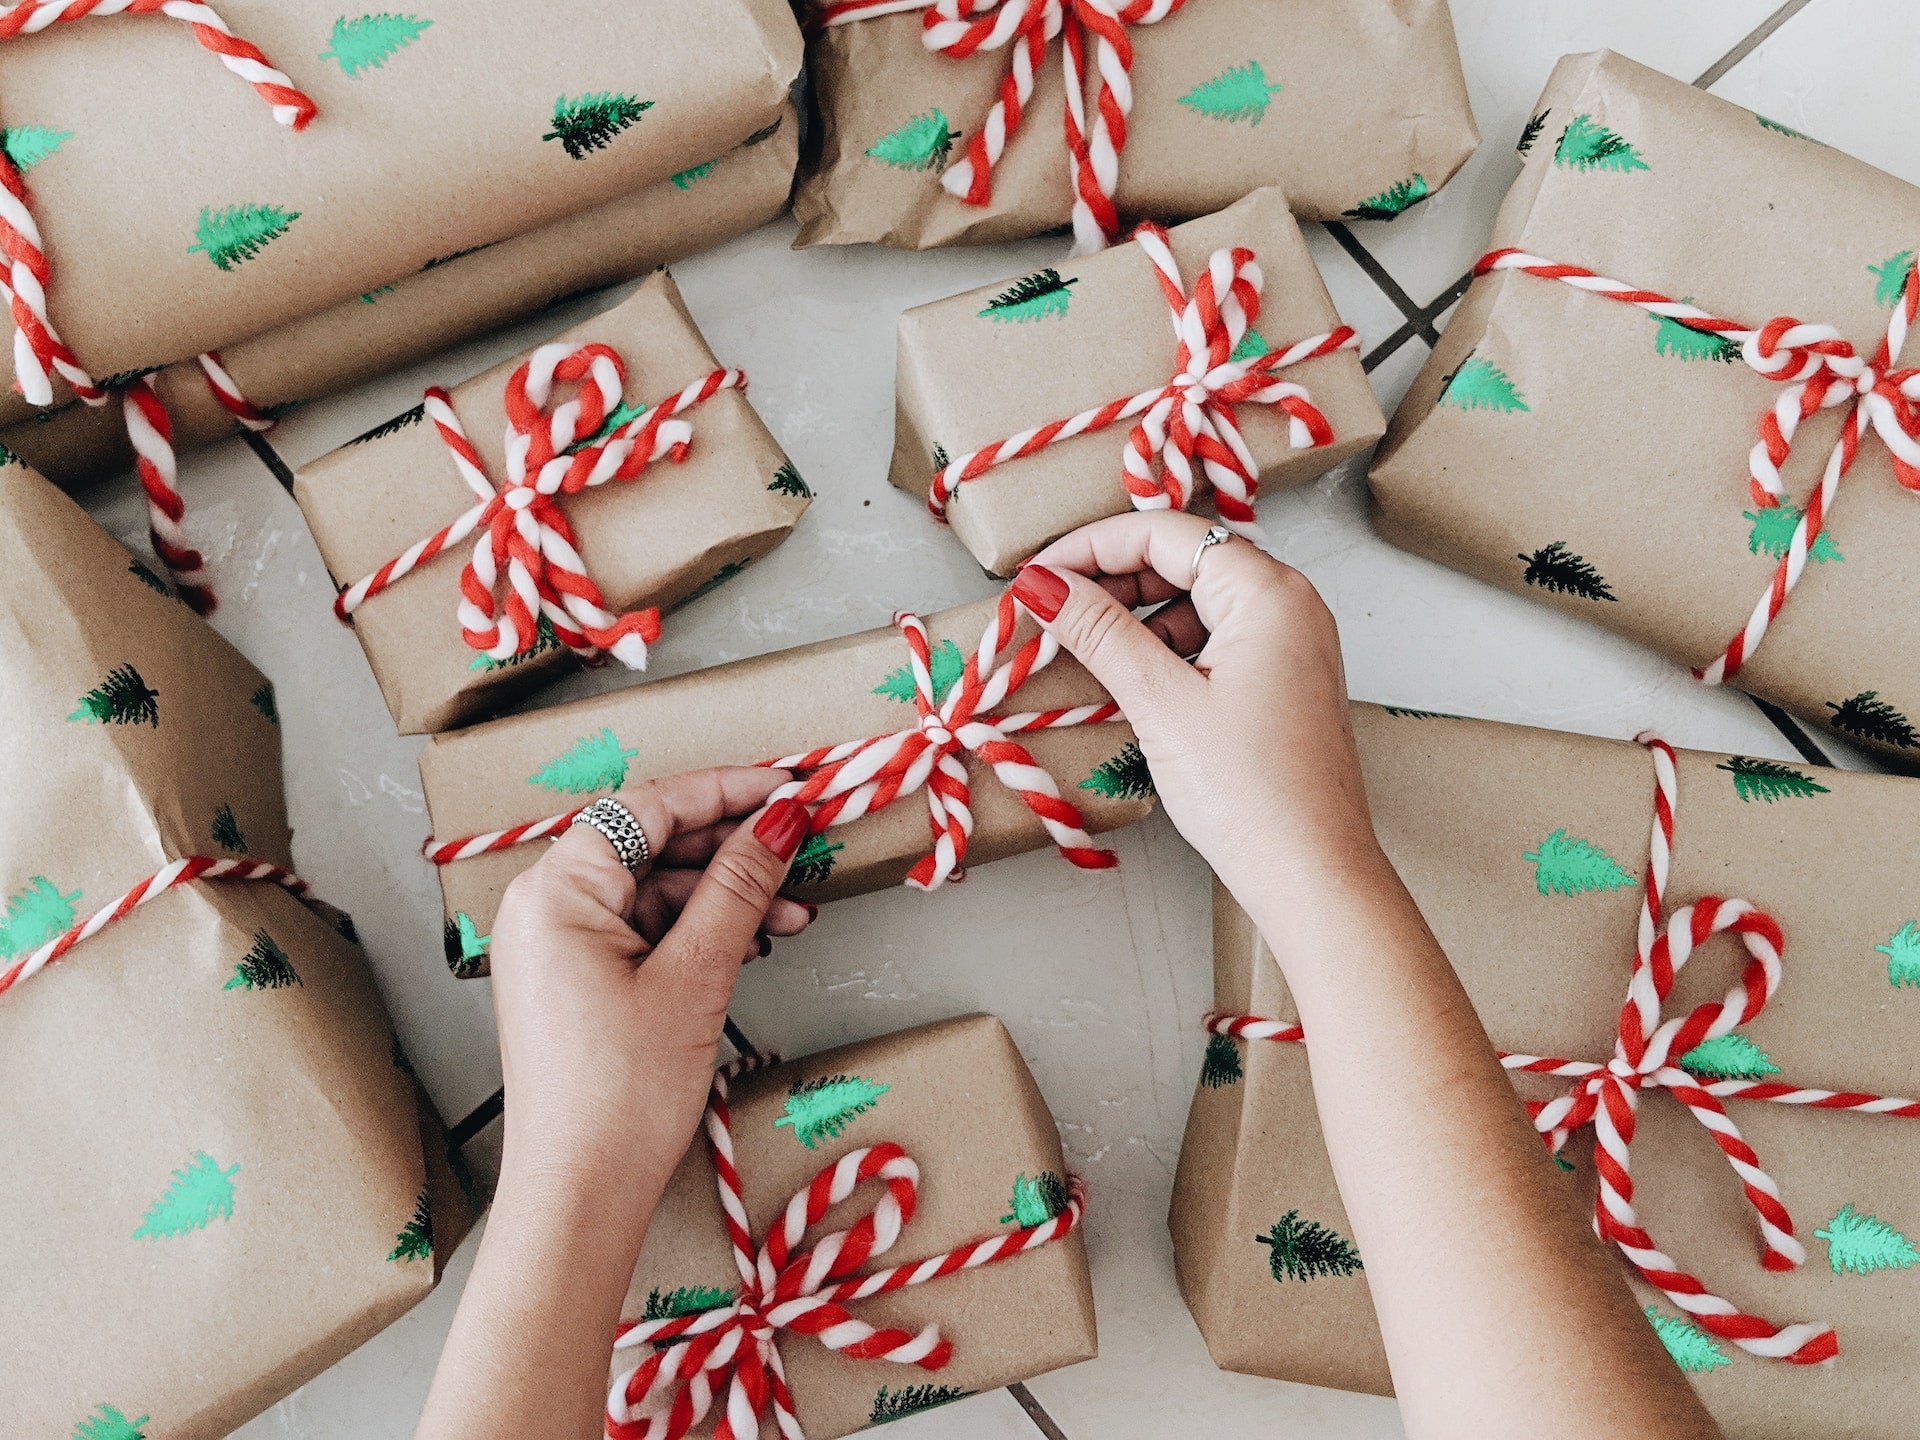 Sustainable gifts: 32 positive presents to give this Christmas